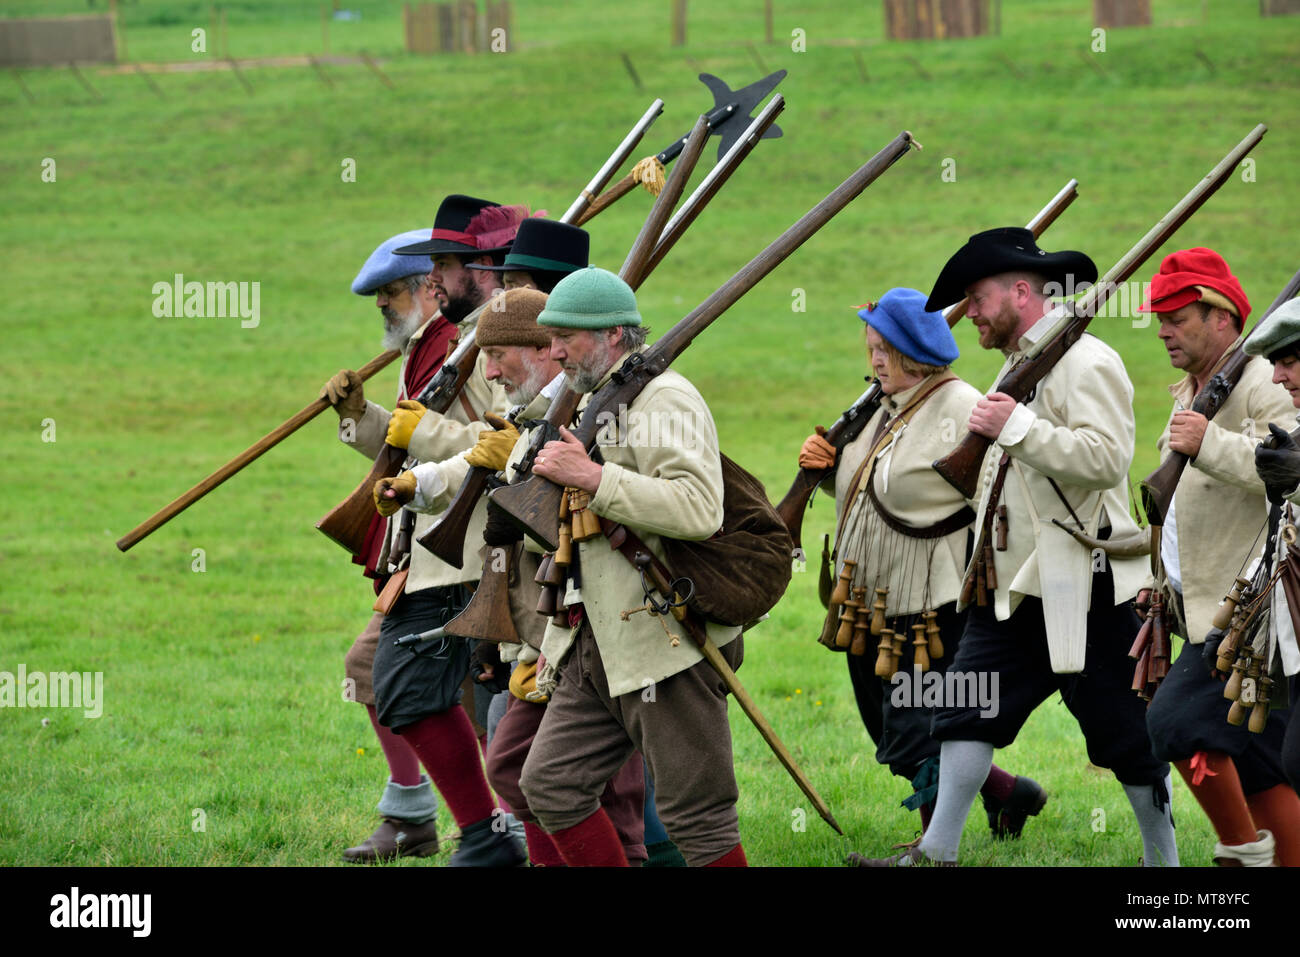 Bristol, UK, 28 May, 2018. Re-enactment of English civil war, The Siege of Bristol on its 375th Anniversary of battles (1645) between Parliamentarians ('Roundheads') and Royalists ('Cavaliers') re-enacted by members of the Sealed Knot in Bristol Ashton Court. Credit: Charles Stirling/Alamy Live News Stock Photo